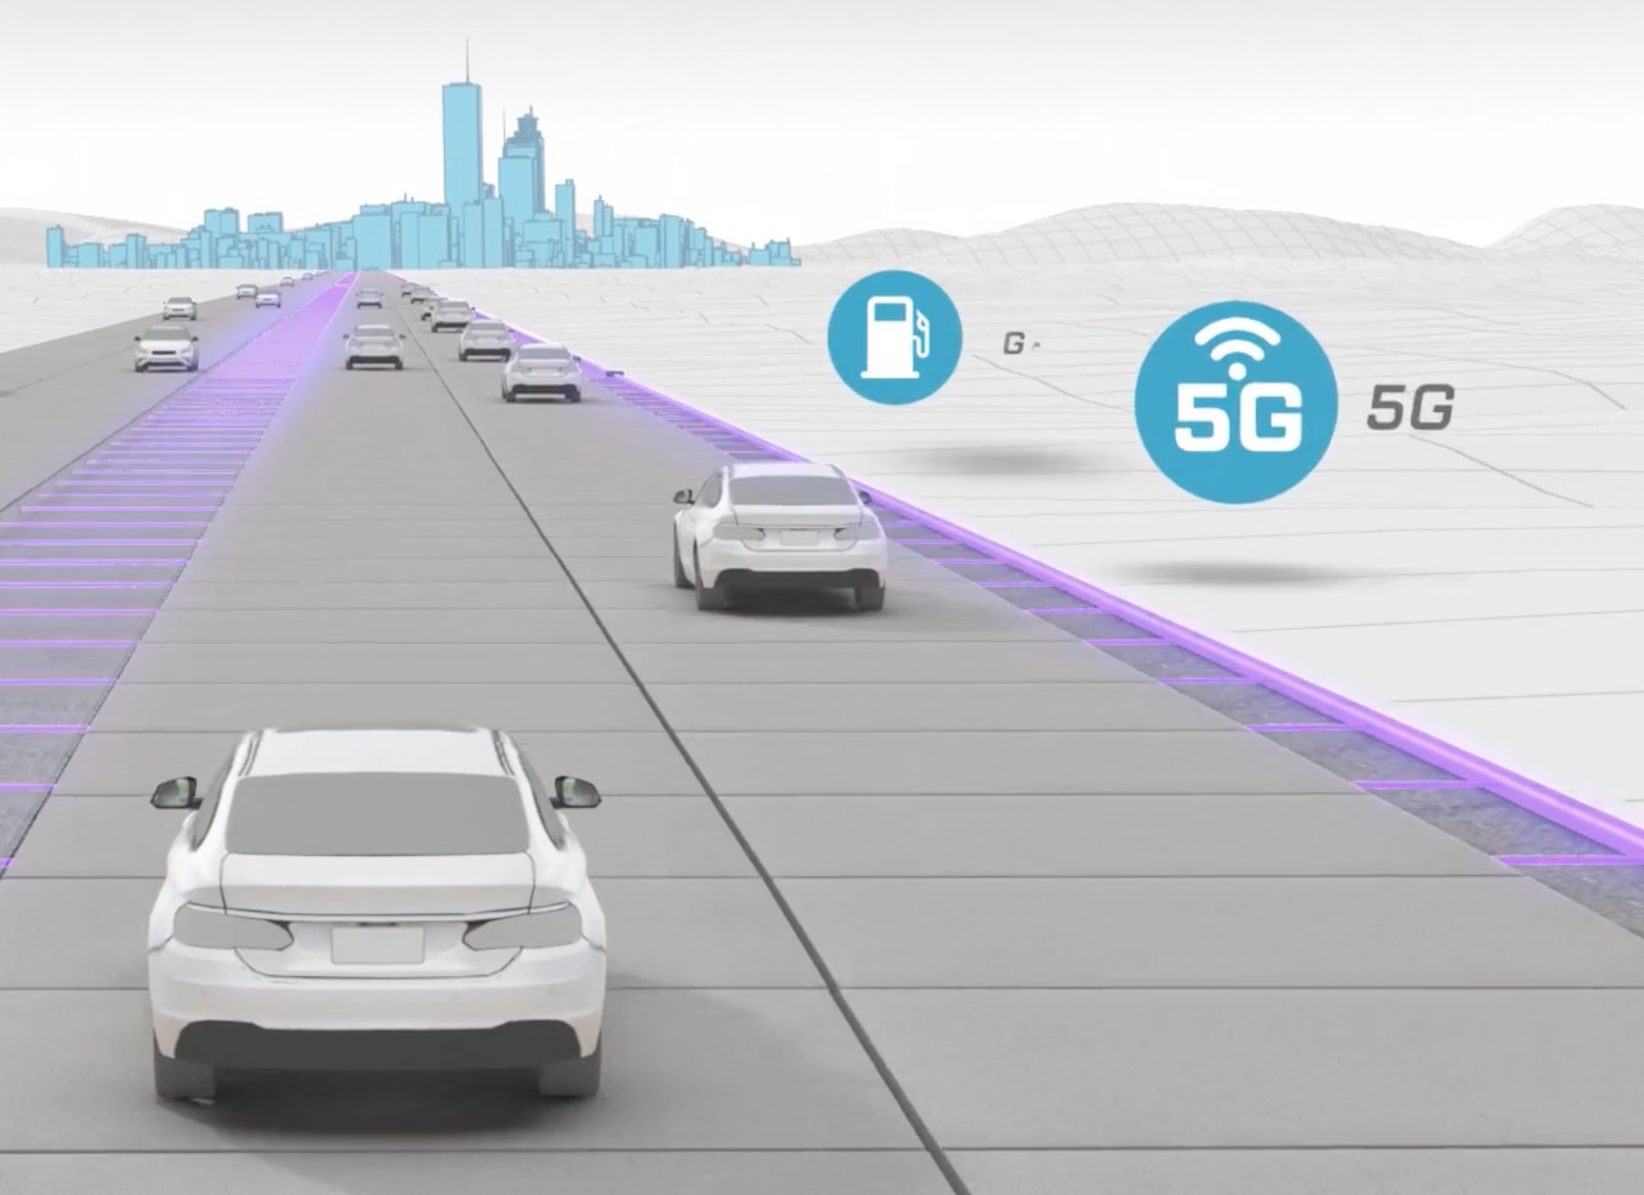 Smart road startup Integrated Roadways launching IoT test lab with MoDOT